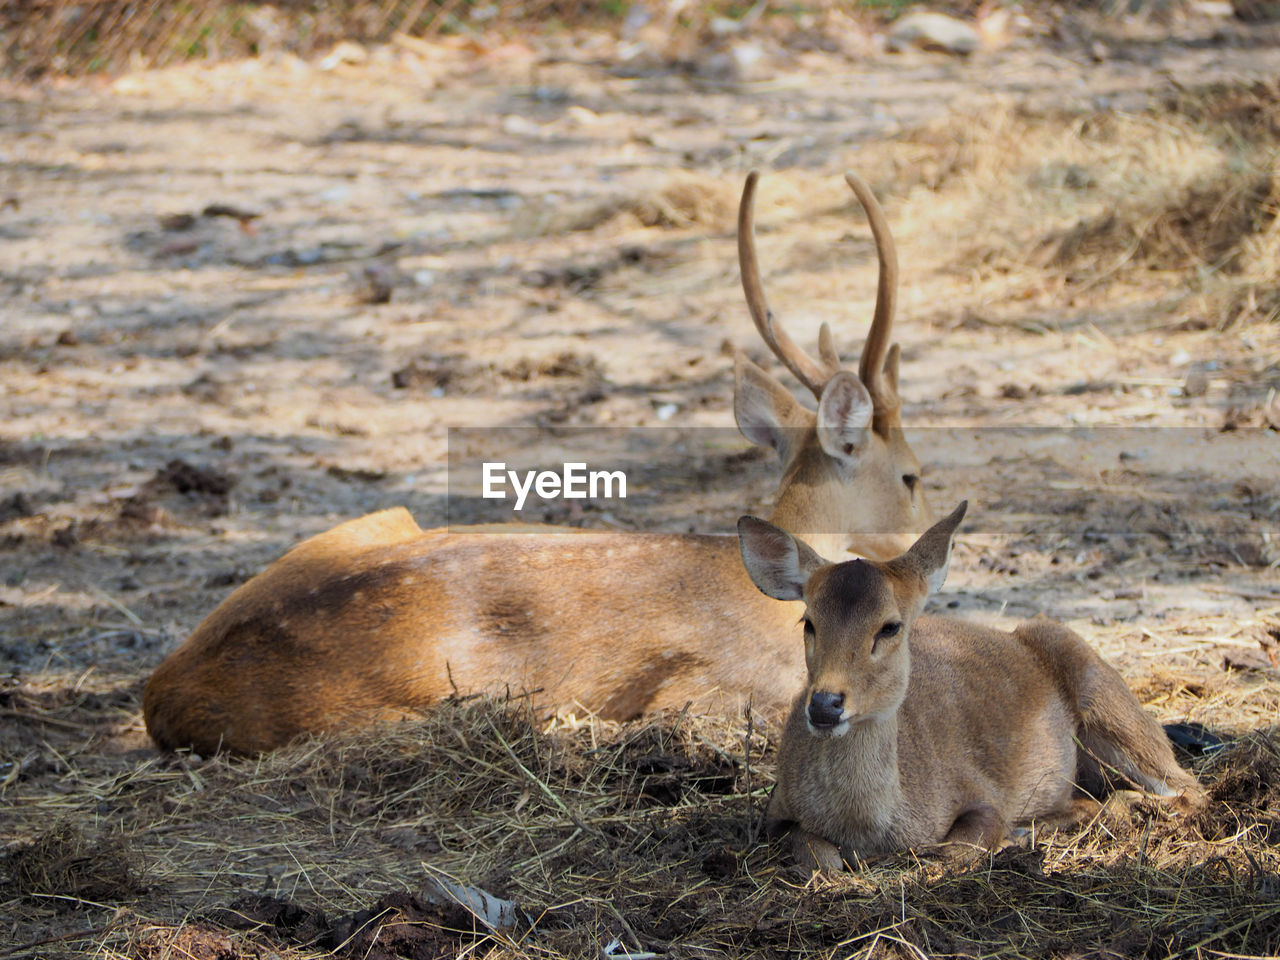 animal, animal themes, animal wildlife, wildlife, mammal, one animal, deer, nature, relaxation, no people, land, antler, field, resting, day, lying down, domestic animals, outdoors, horned, herbivorous, brown, grass, environment, horn, plant, portrait, focus on foreground, full length, stag, antelope